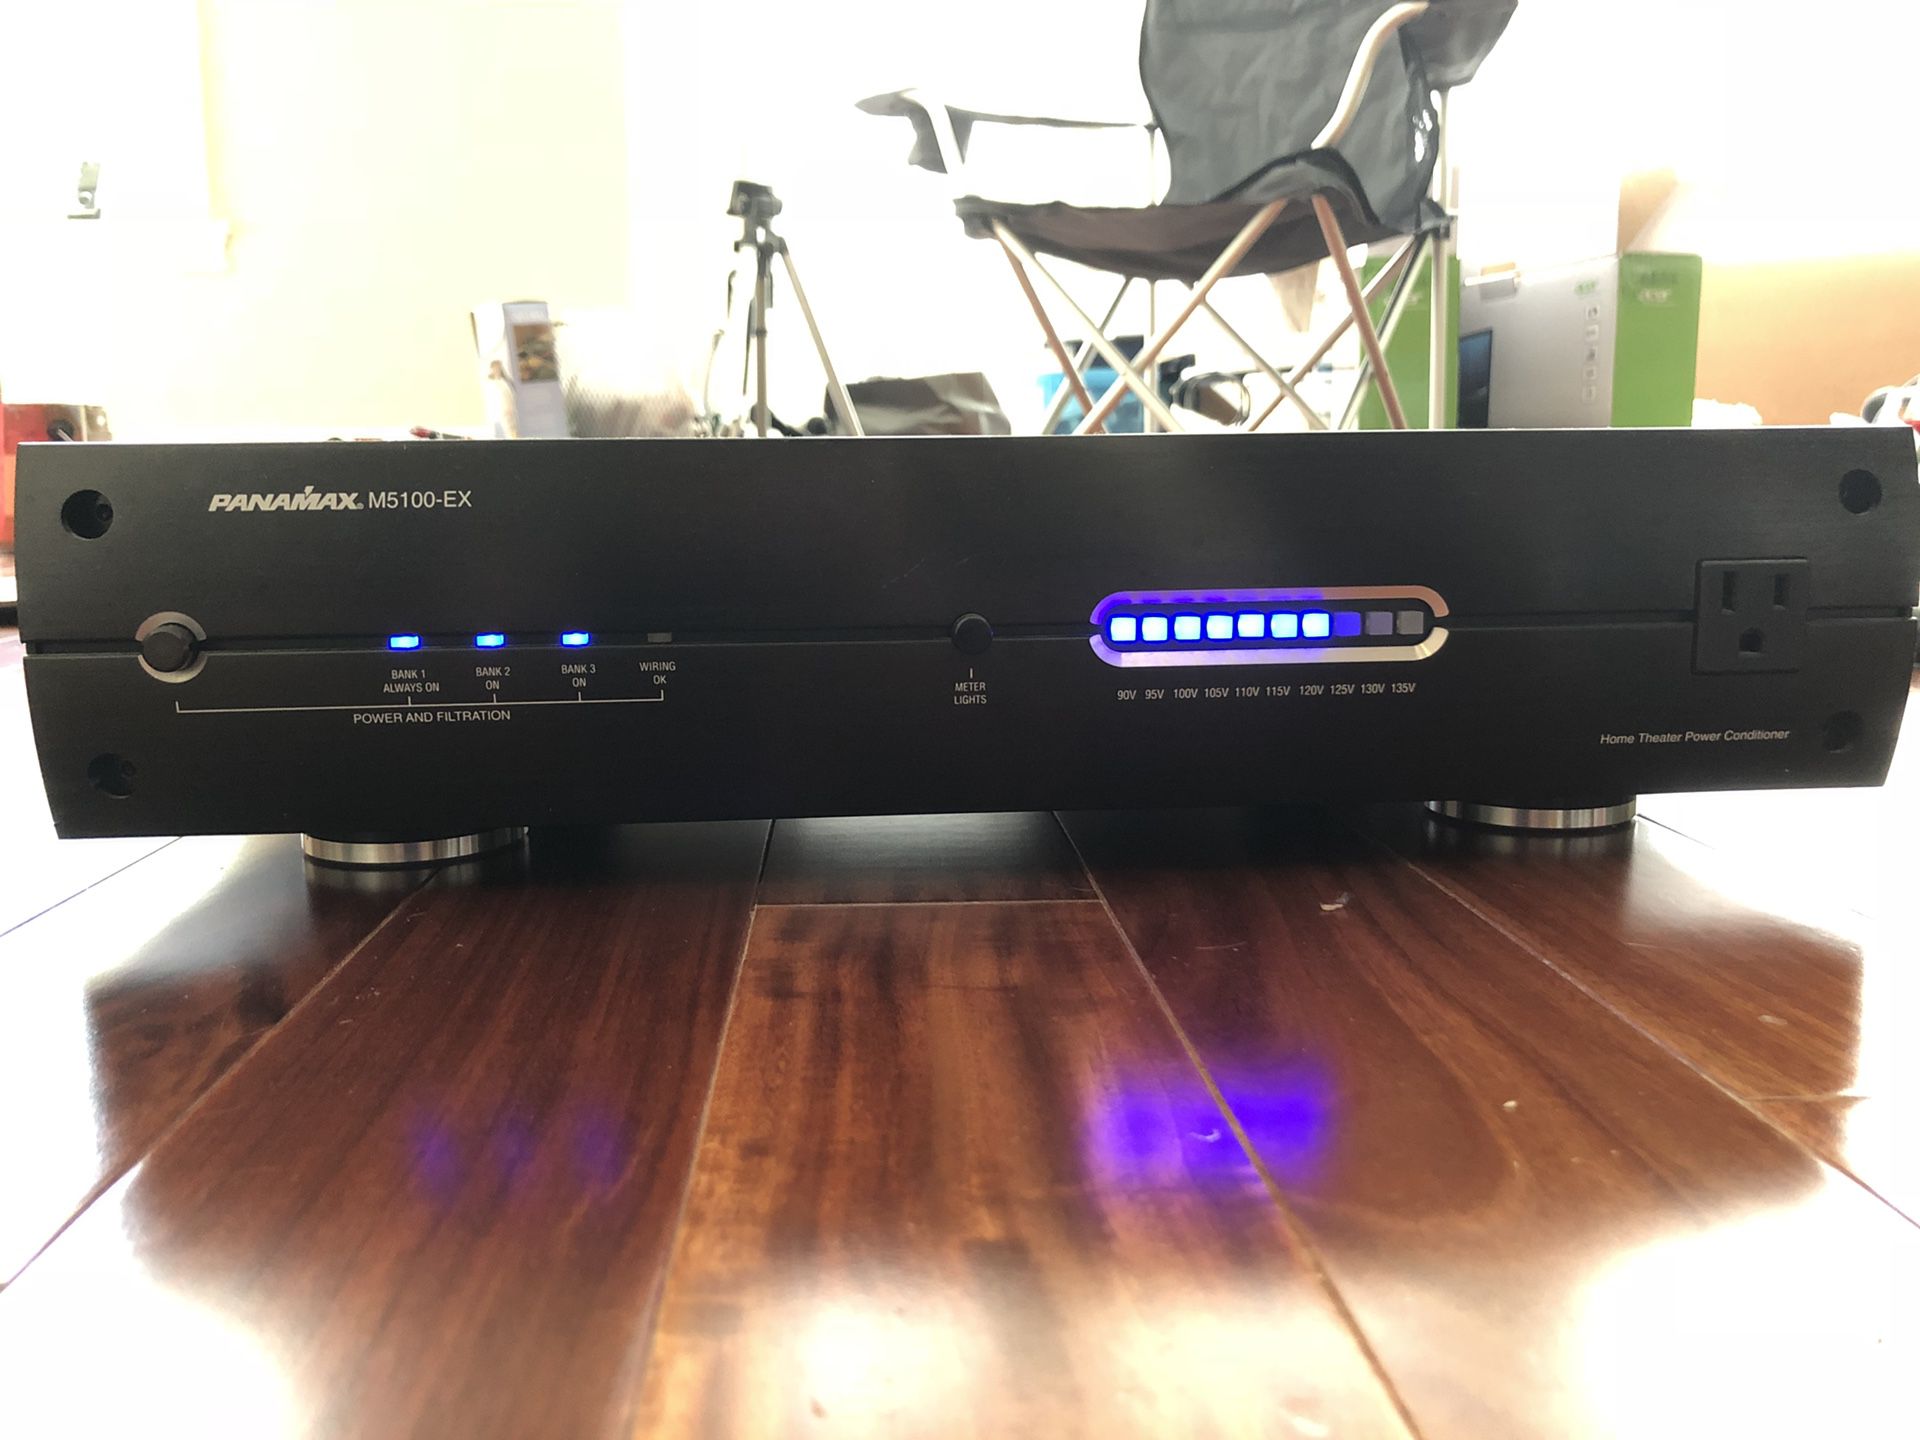 PANAMAX Home Theater Power Conditioner